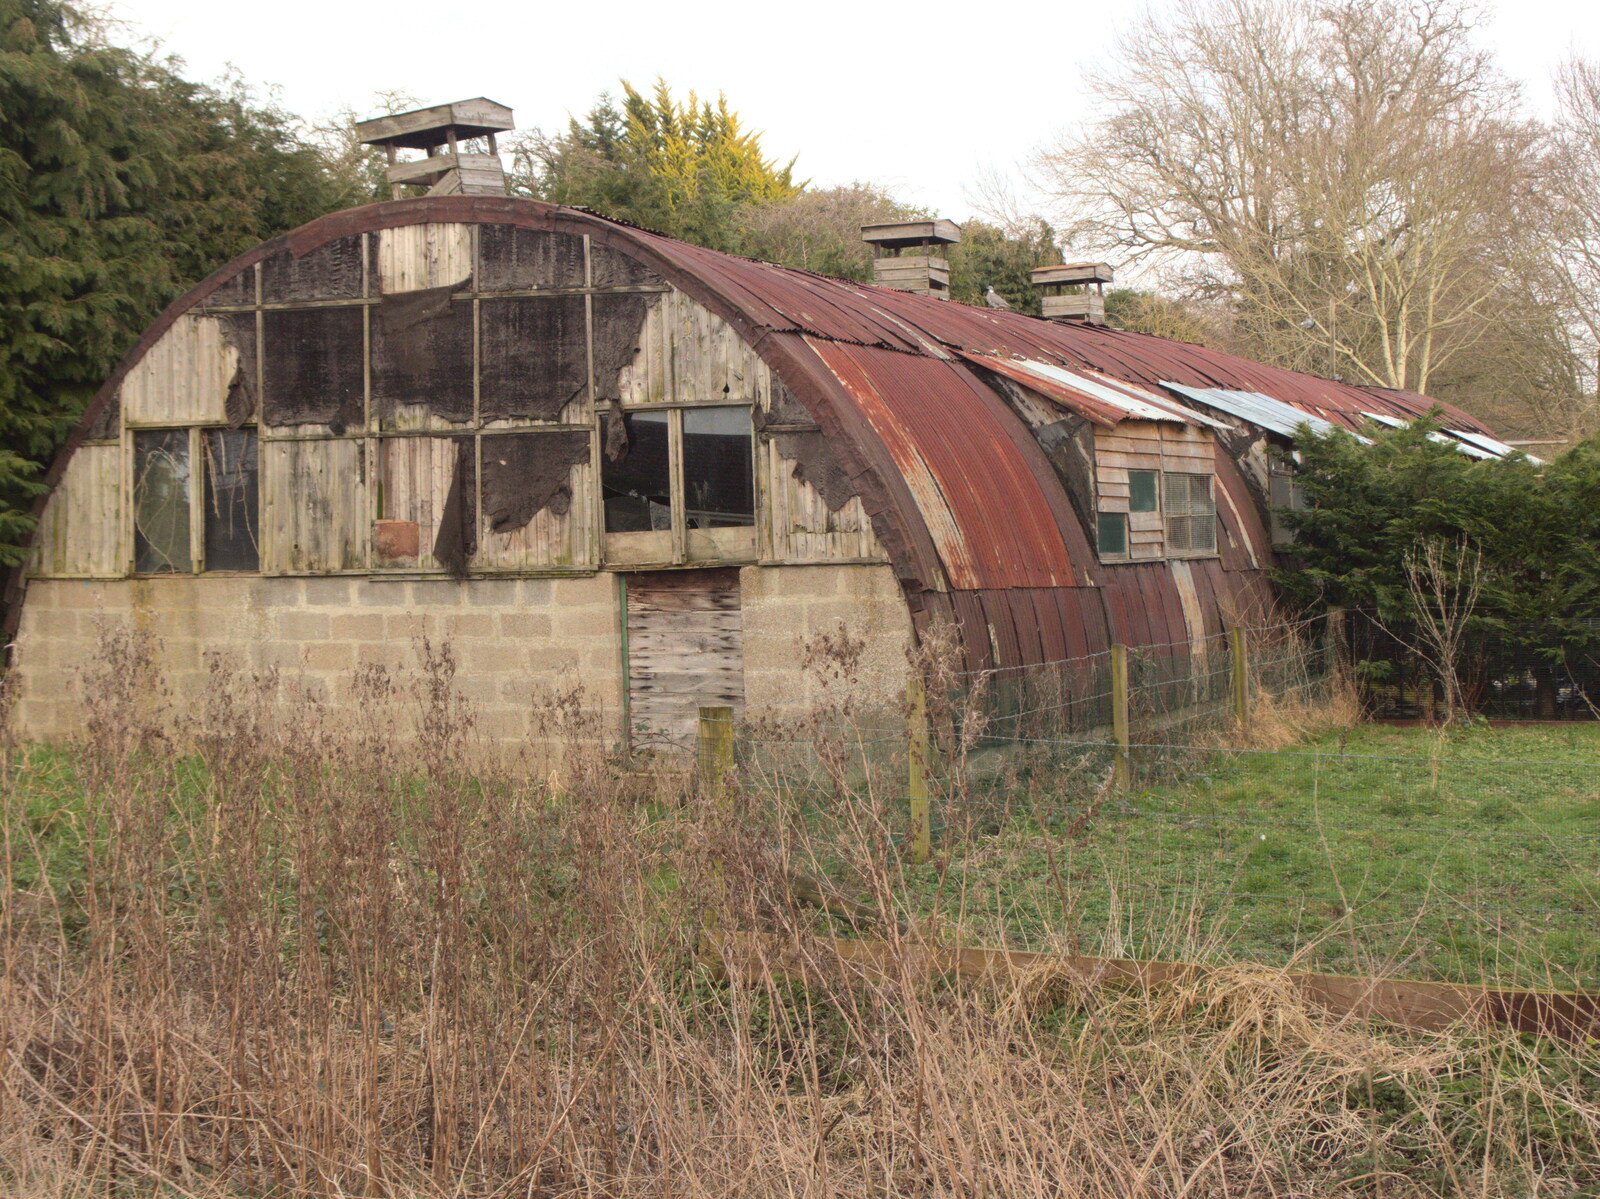 A cool semi-derelict Nissen Hut from The Mean Streets of Eye, Suffolk - 7th March 2021